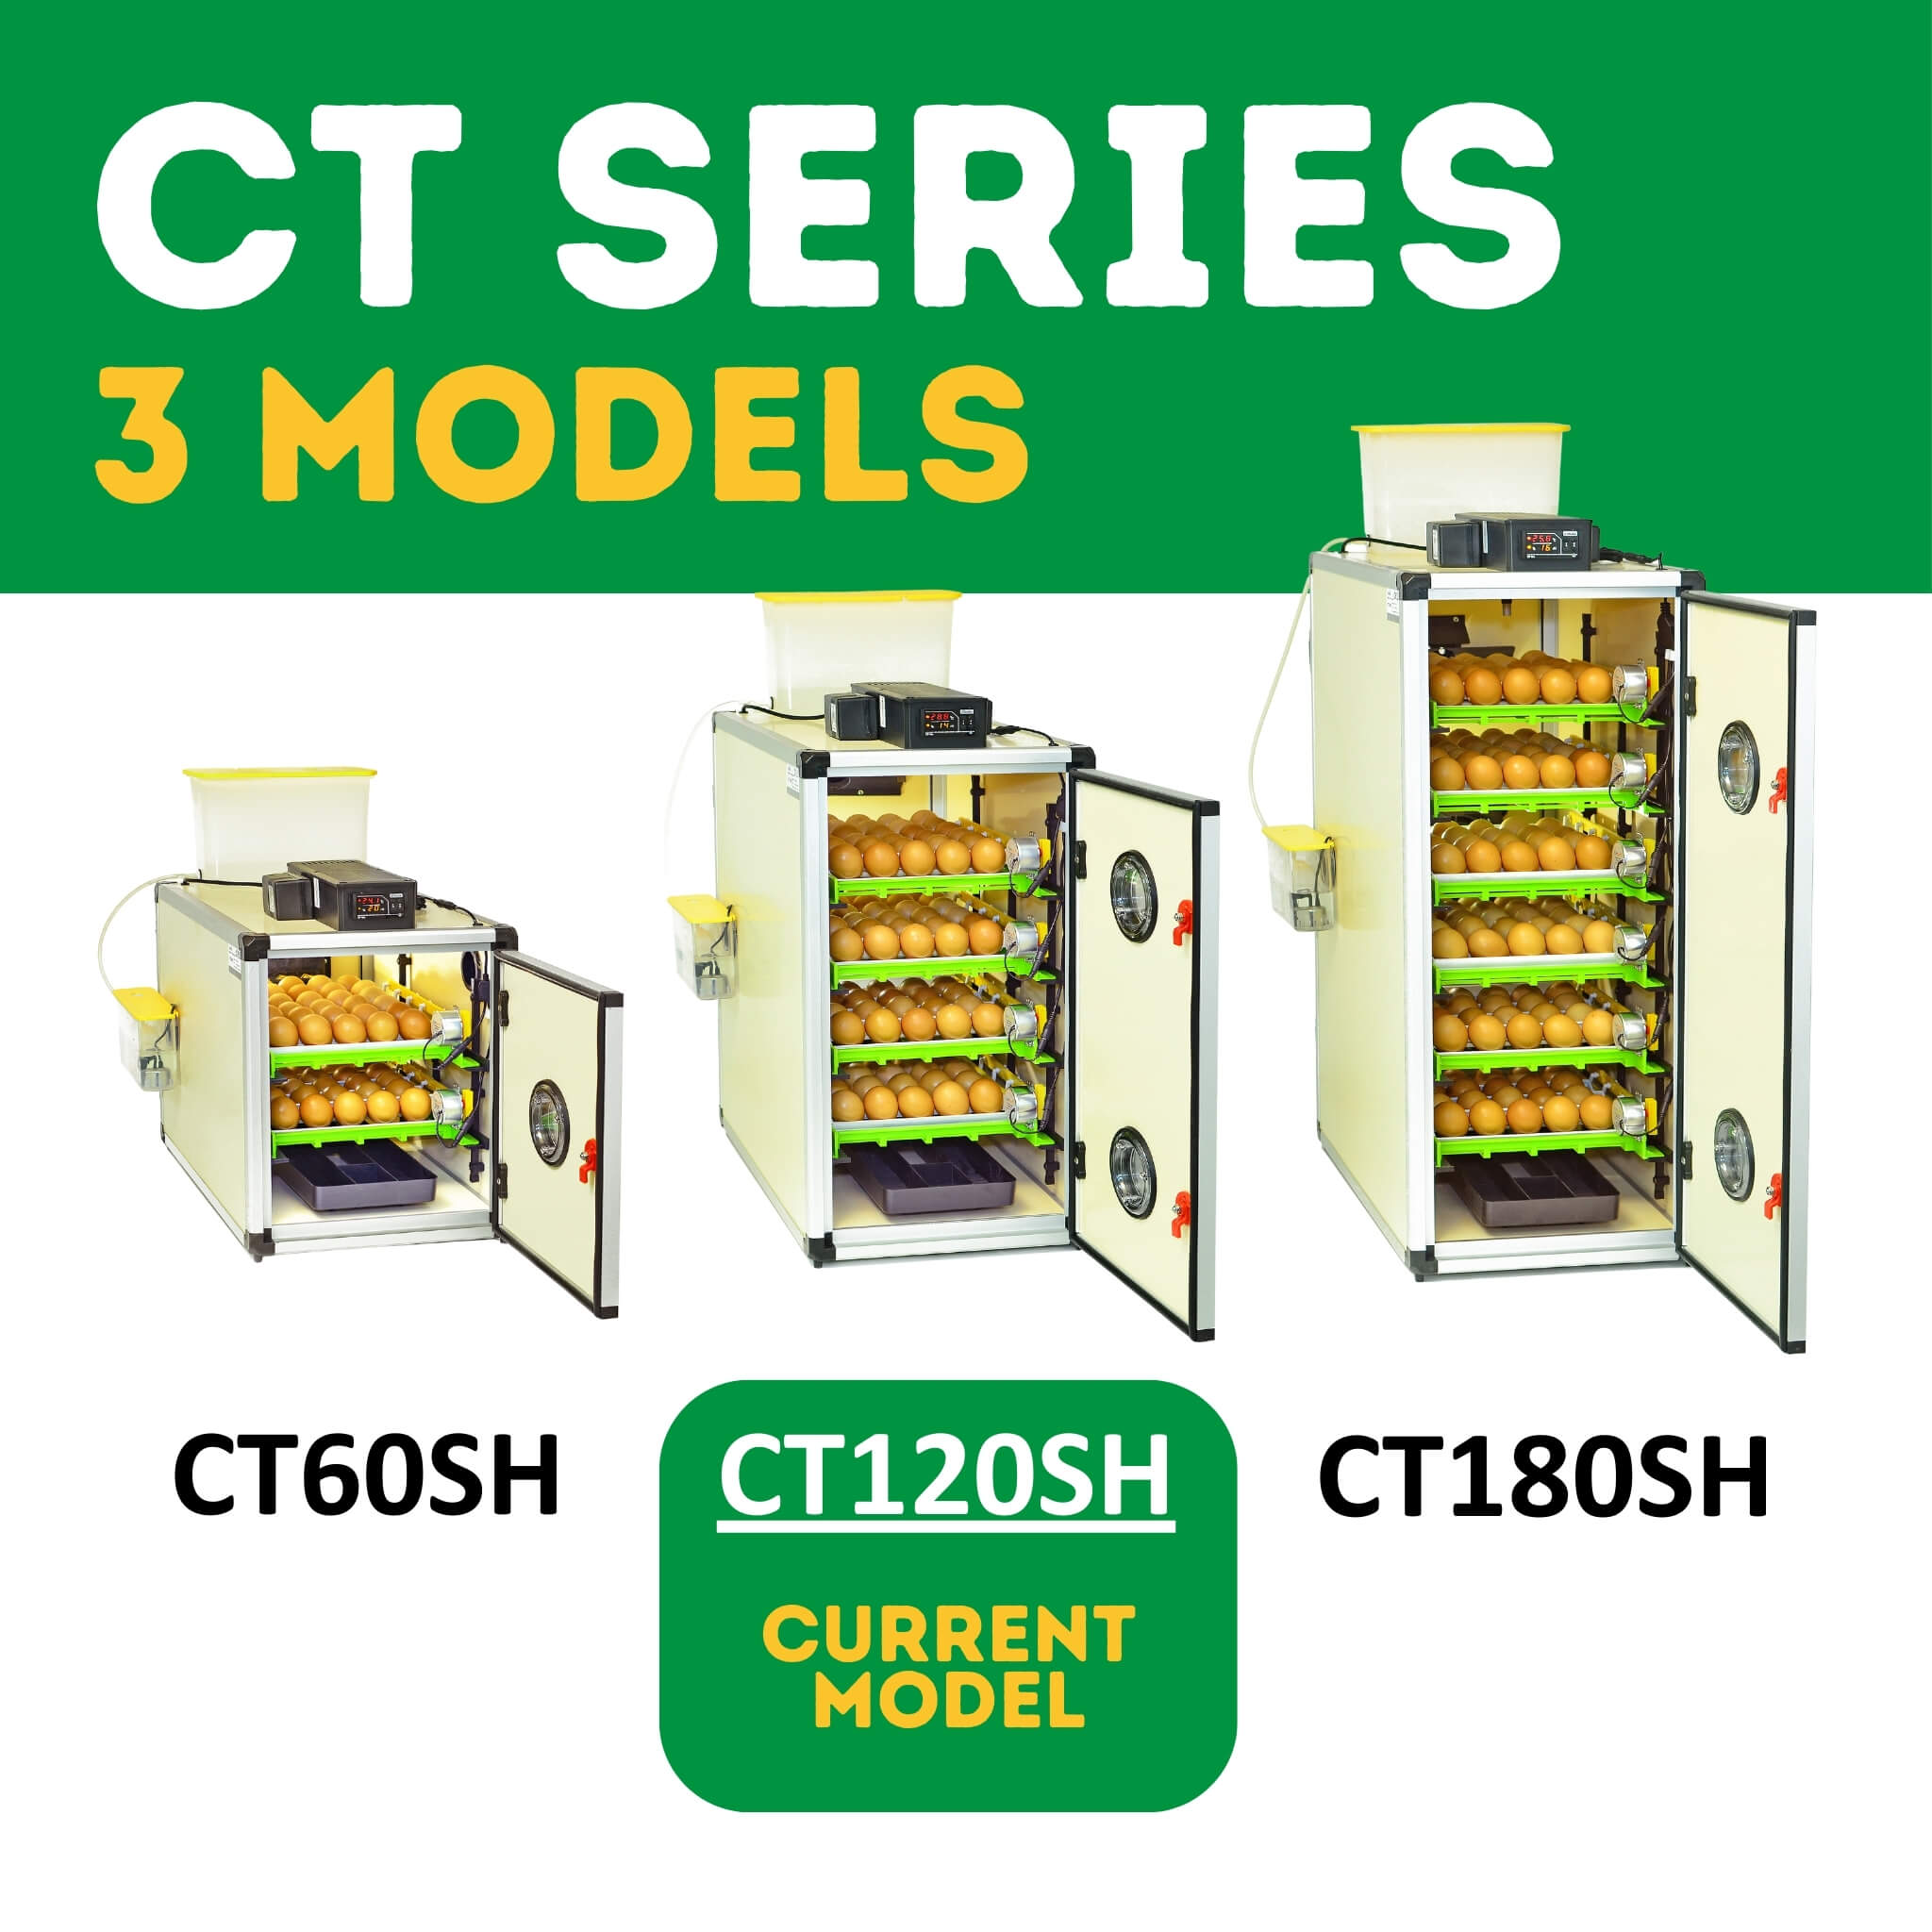 Hatching Time Cimuka CT series Incubator. Image text reads CT series 3 models. Image shows 3 Cimuka CT incubators from left to right they are CT60SH, CT120SH (current model) and CT180. All incubators have door open, full setting trays of brown chicken eggs. Digital controls can be seen on top of incubators in front of water reservoir tank connected to Humisonic Humidifier.